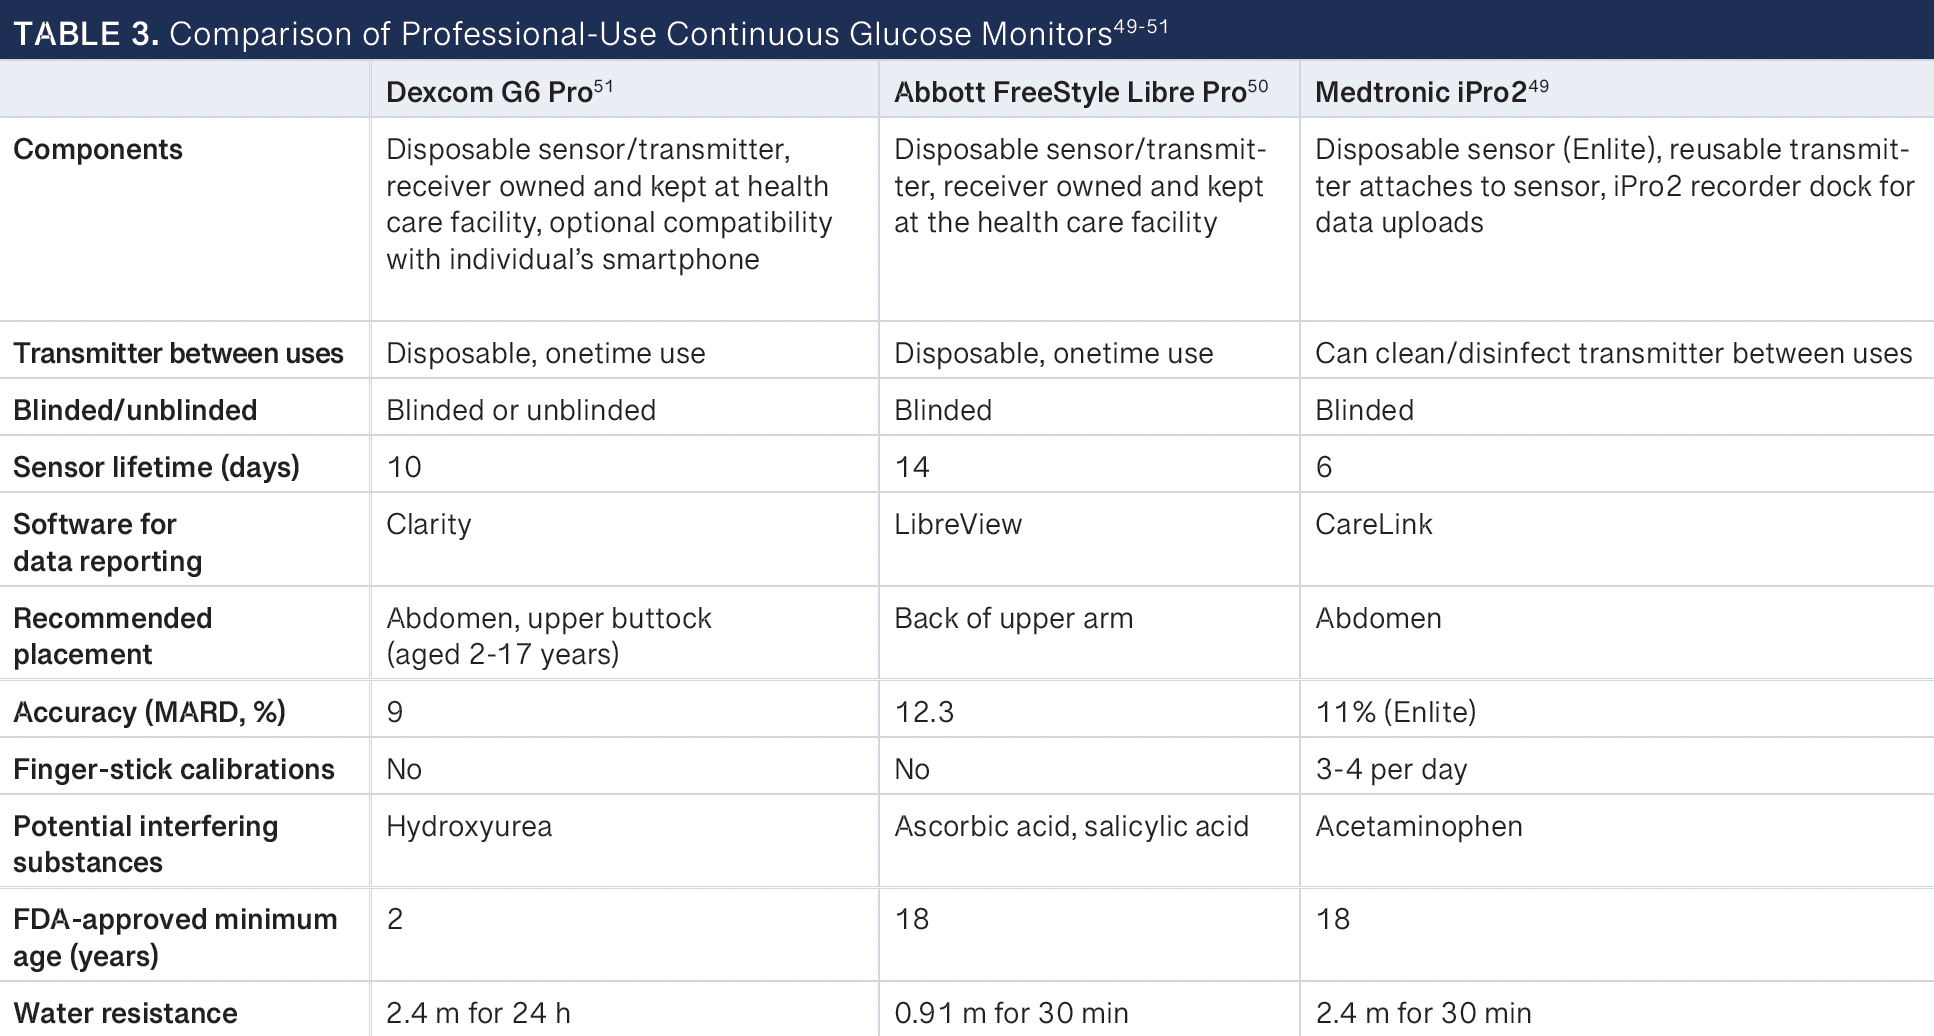 Table 3: Comparison of Professional-Use Continuous Glucose Monitors -- MARD, mean absolute relative difference.